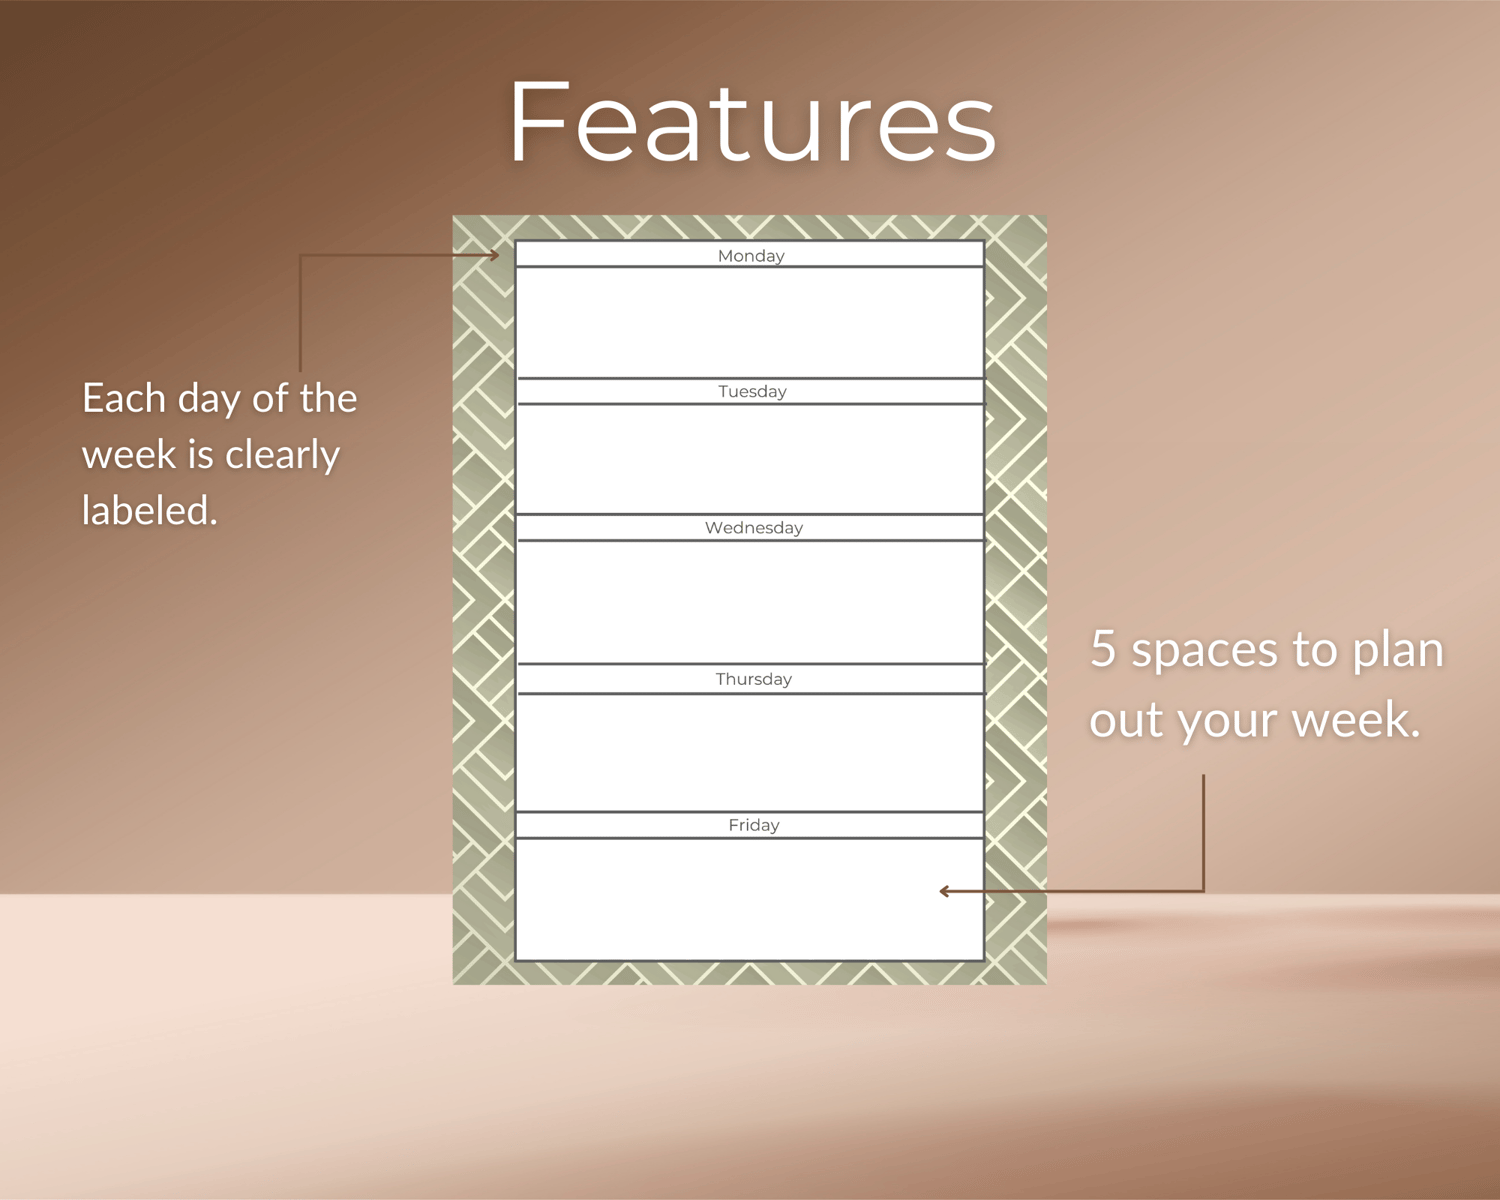 Weekly Spread Planner Insert - Digital Download in sizes A4, A5, A6, and  Letter - Payhip